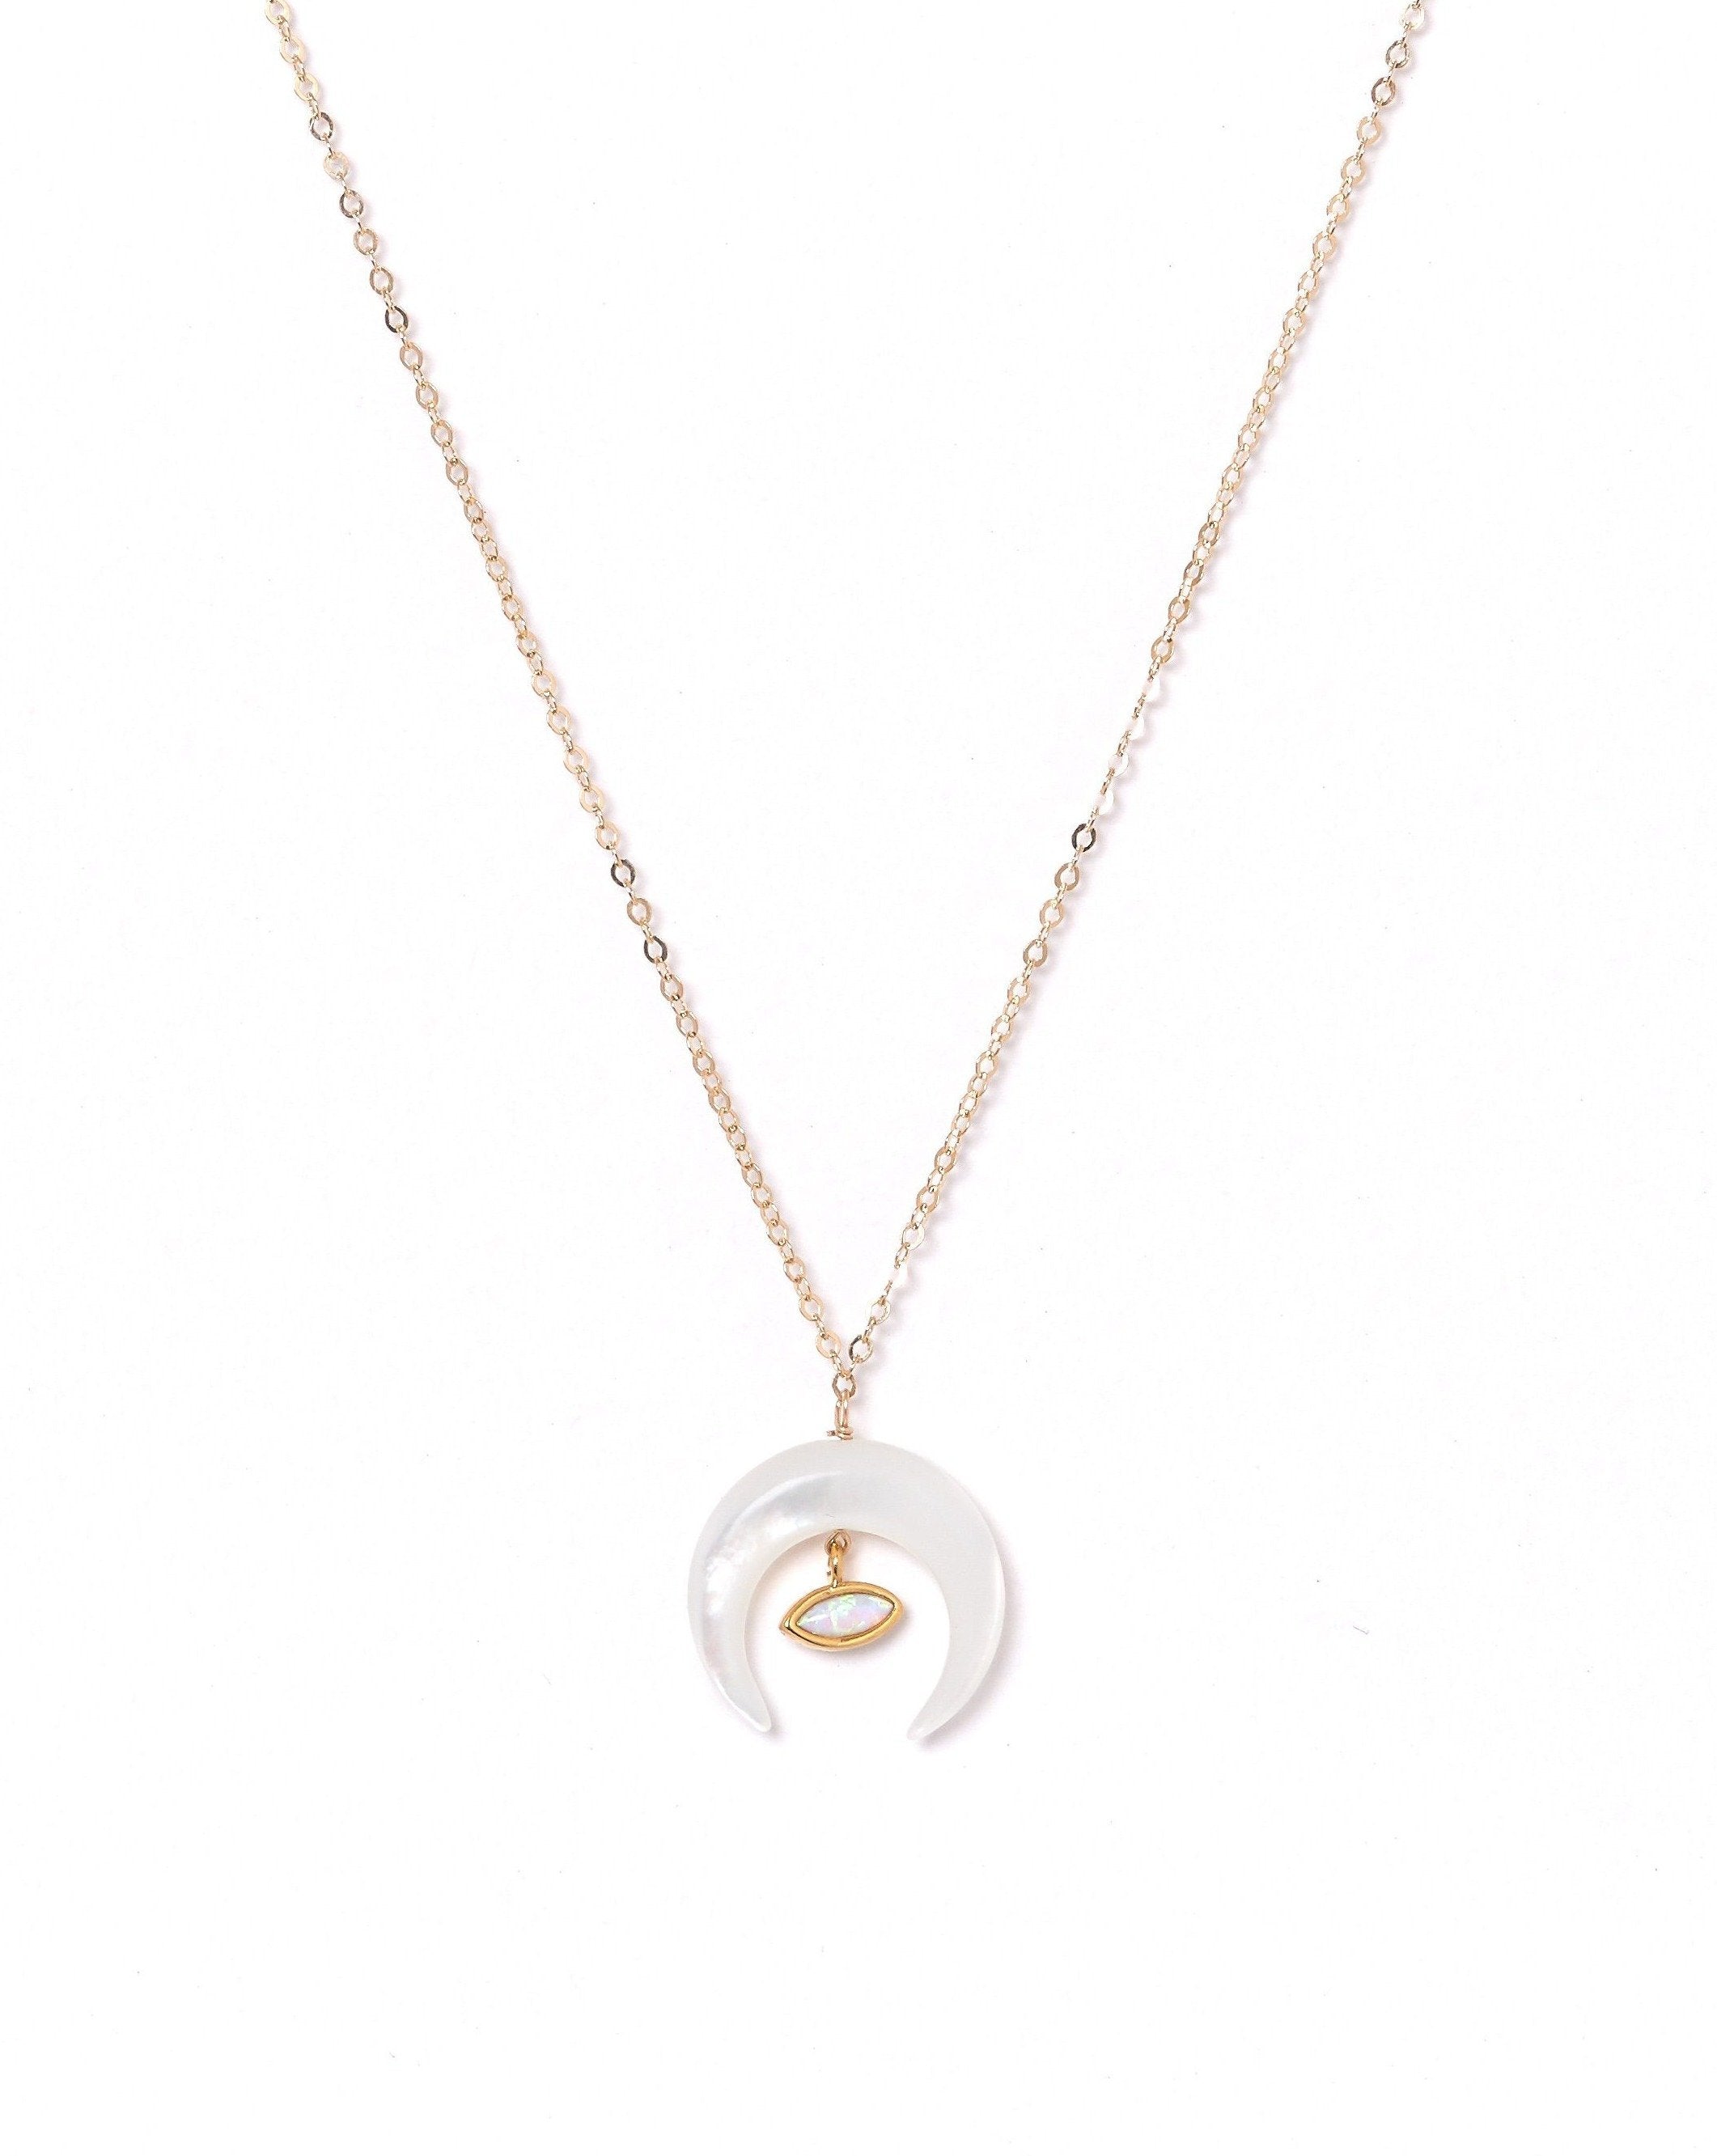 Brillar Necklace by KOZAKH. A 16 to 18 inch adjustable length necklace in 14K Gold Filled, featuring a Marquise Opal charm and a hand carved Mother of Pearl crescent moon charm.